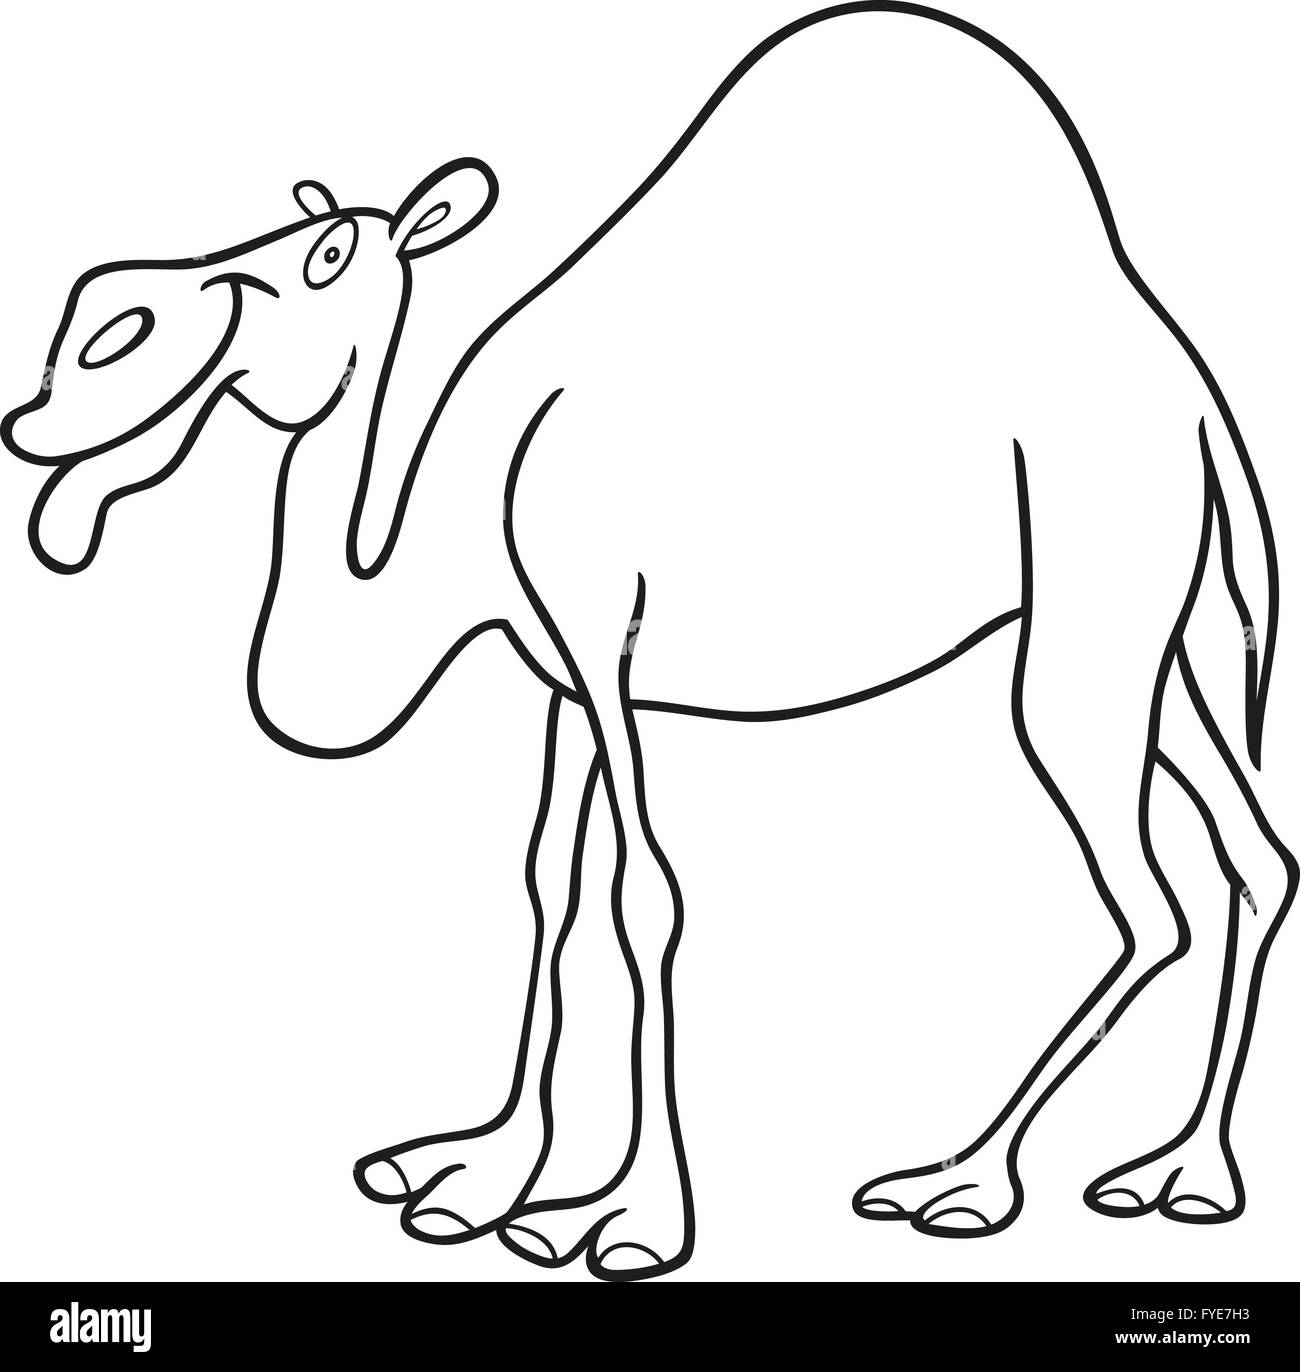 dromedary camel for coloring book Stock Photo